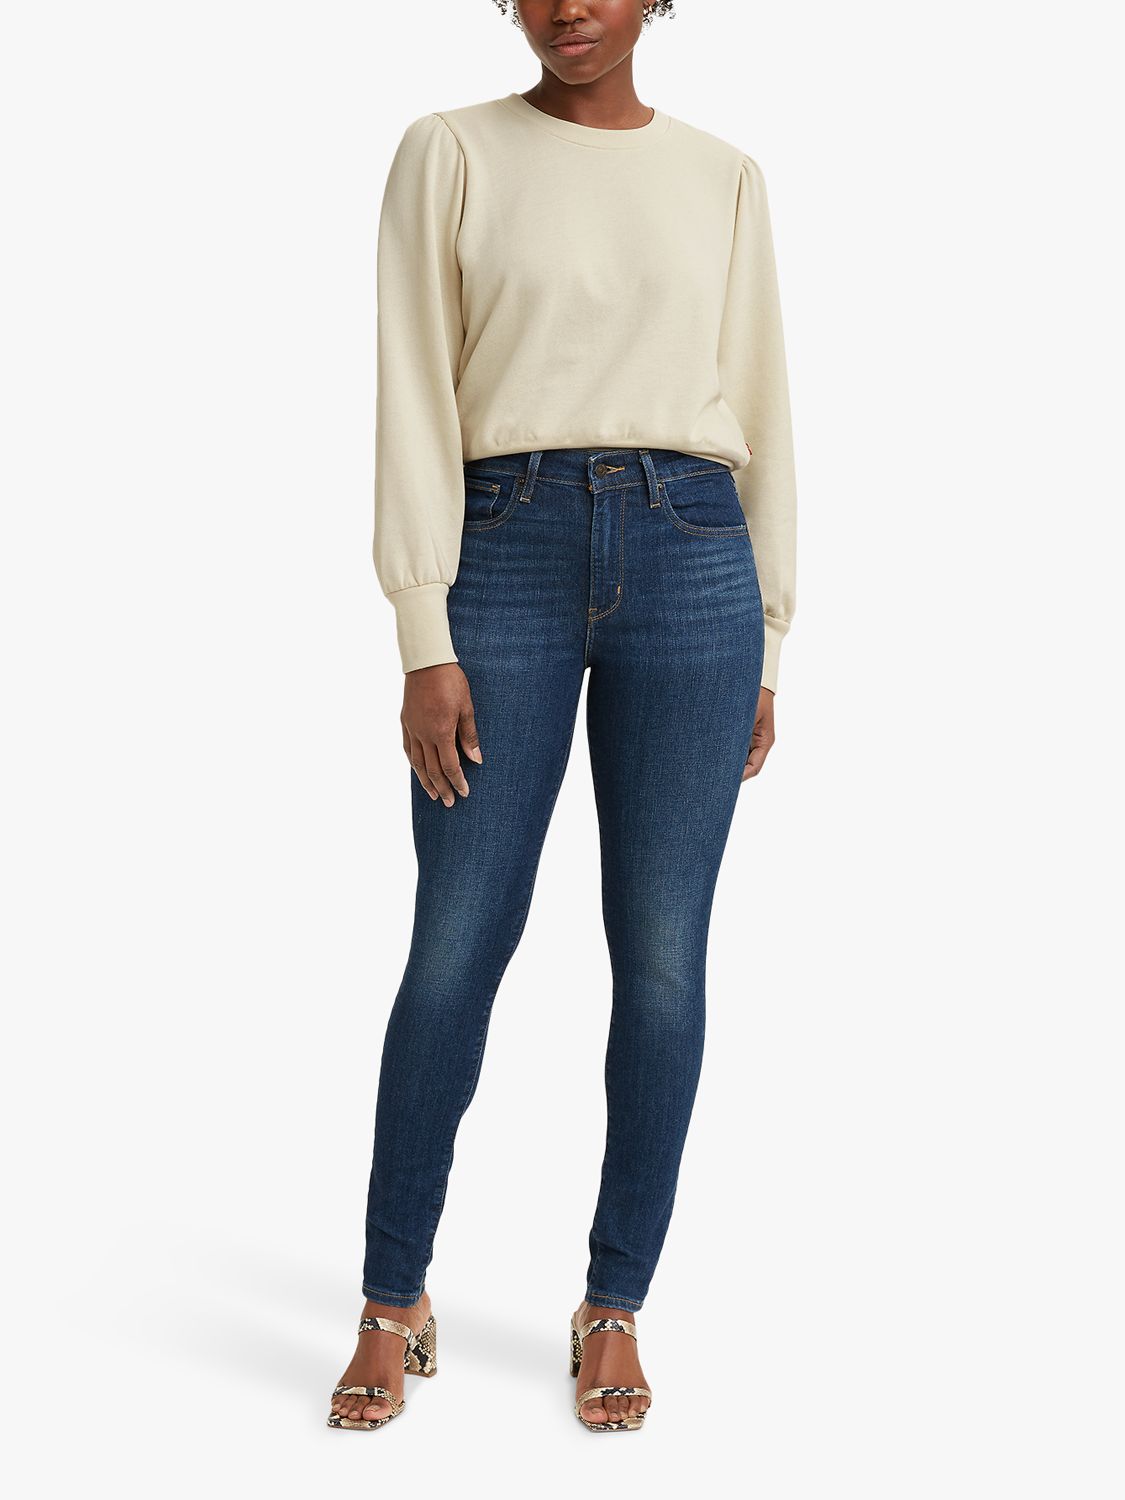 Levi's 721 High Rise Skinny Jeans, Good Evening at John Lewis & Partners